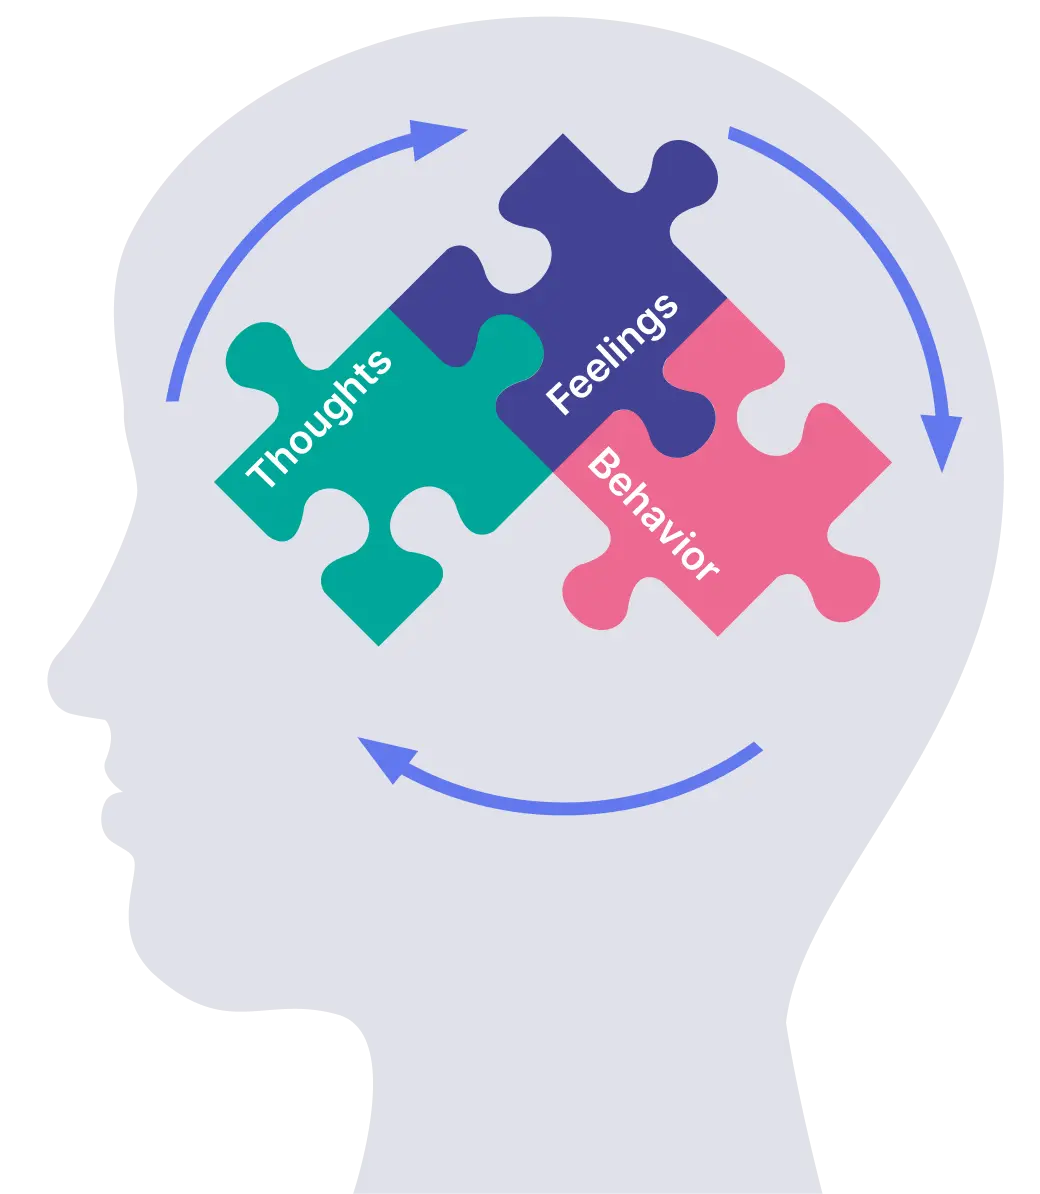 The mind as a jigsaw puzzle with three pieces, thoughts, feelings, and behaviors